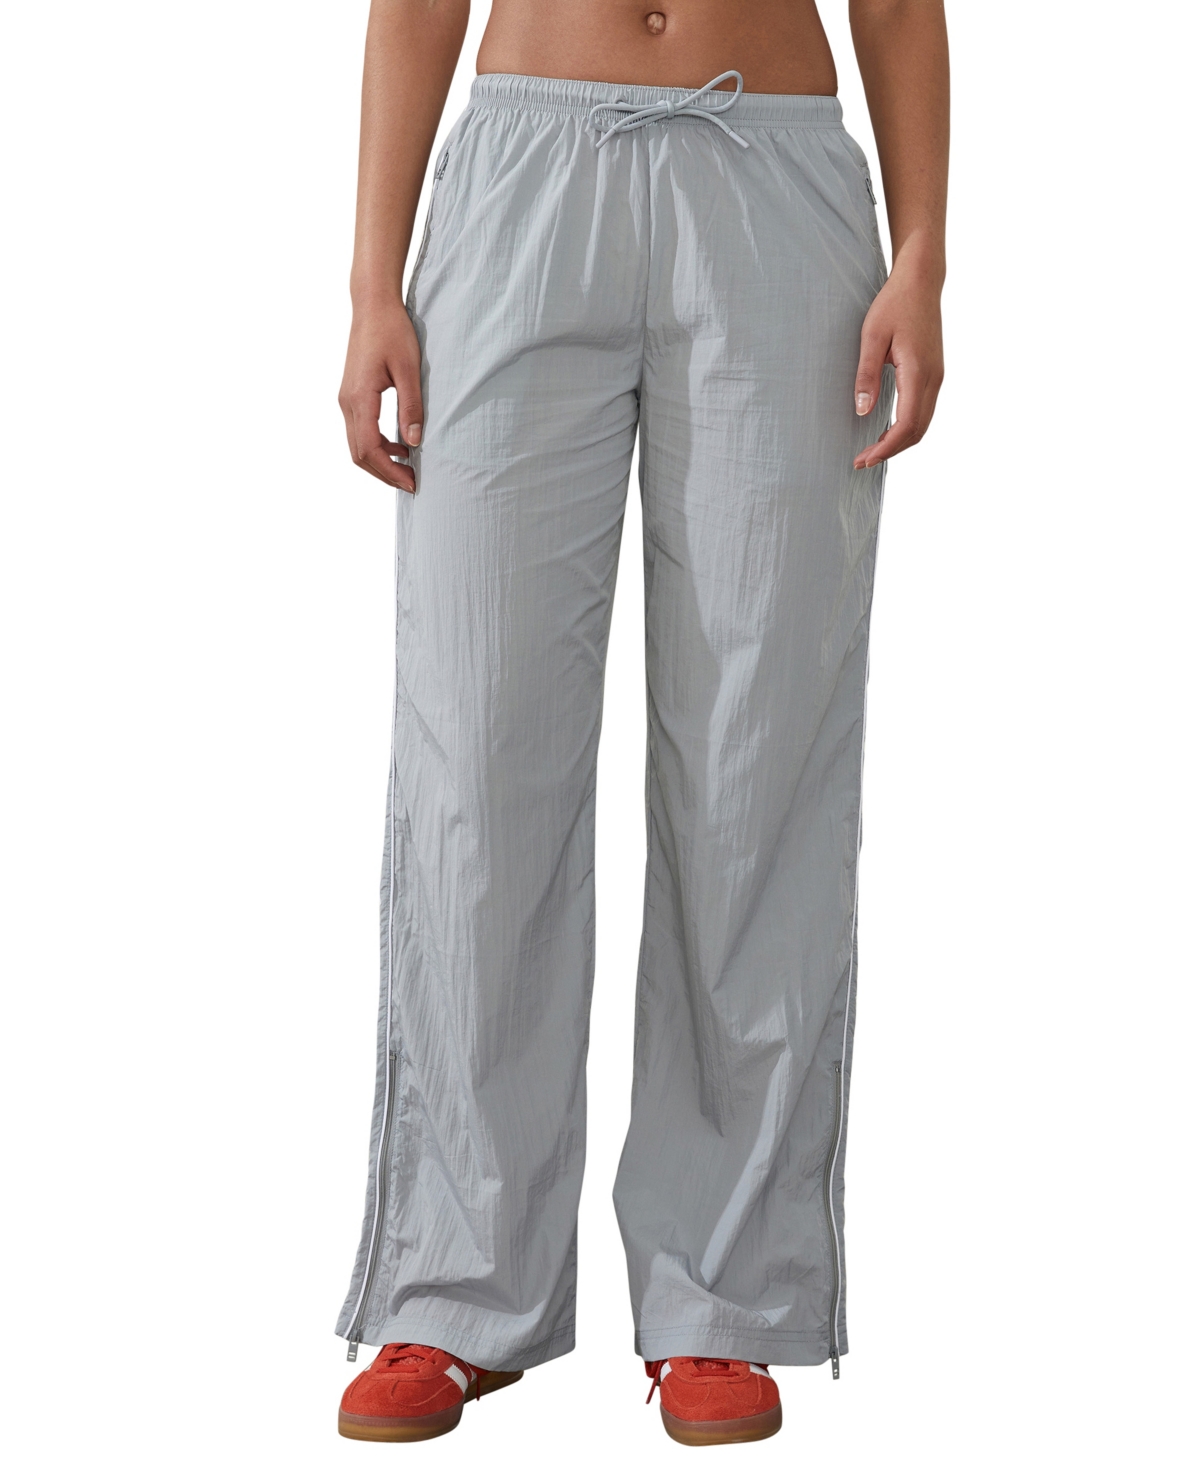 Women's Warm Up Woven Pants - Cool Gray, Piping